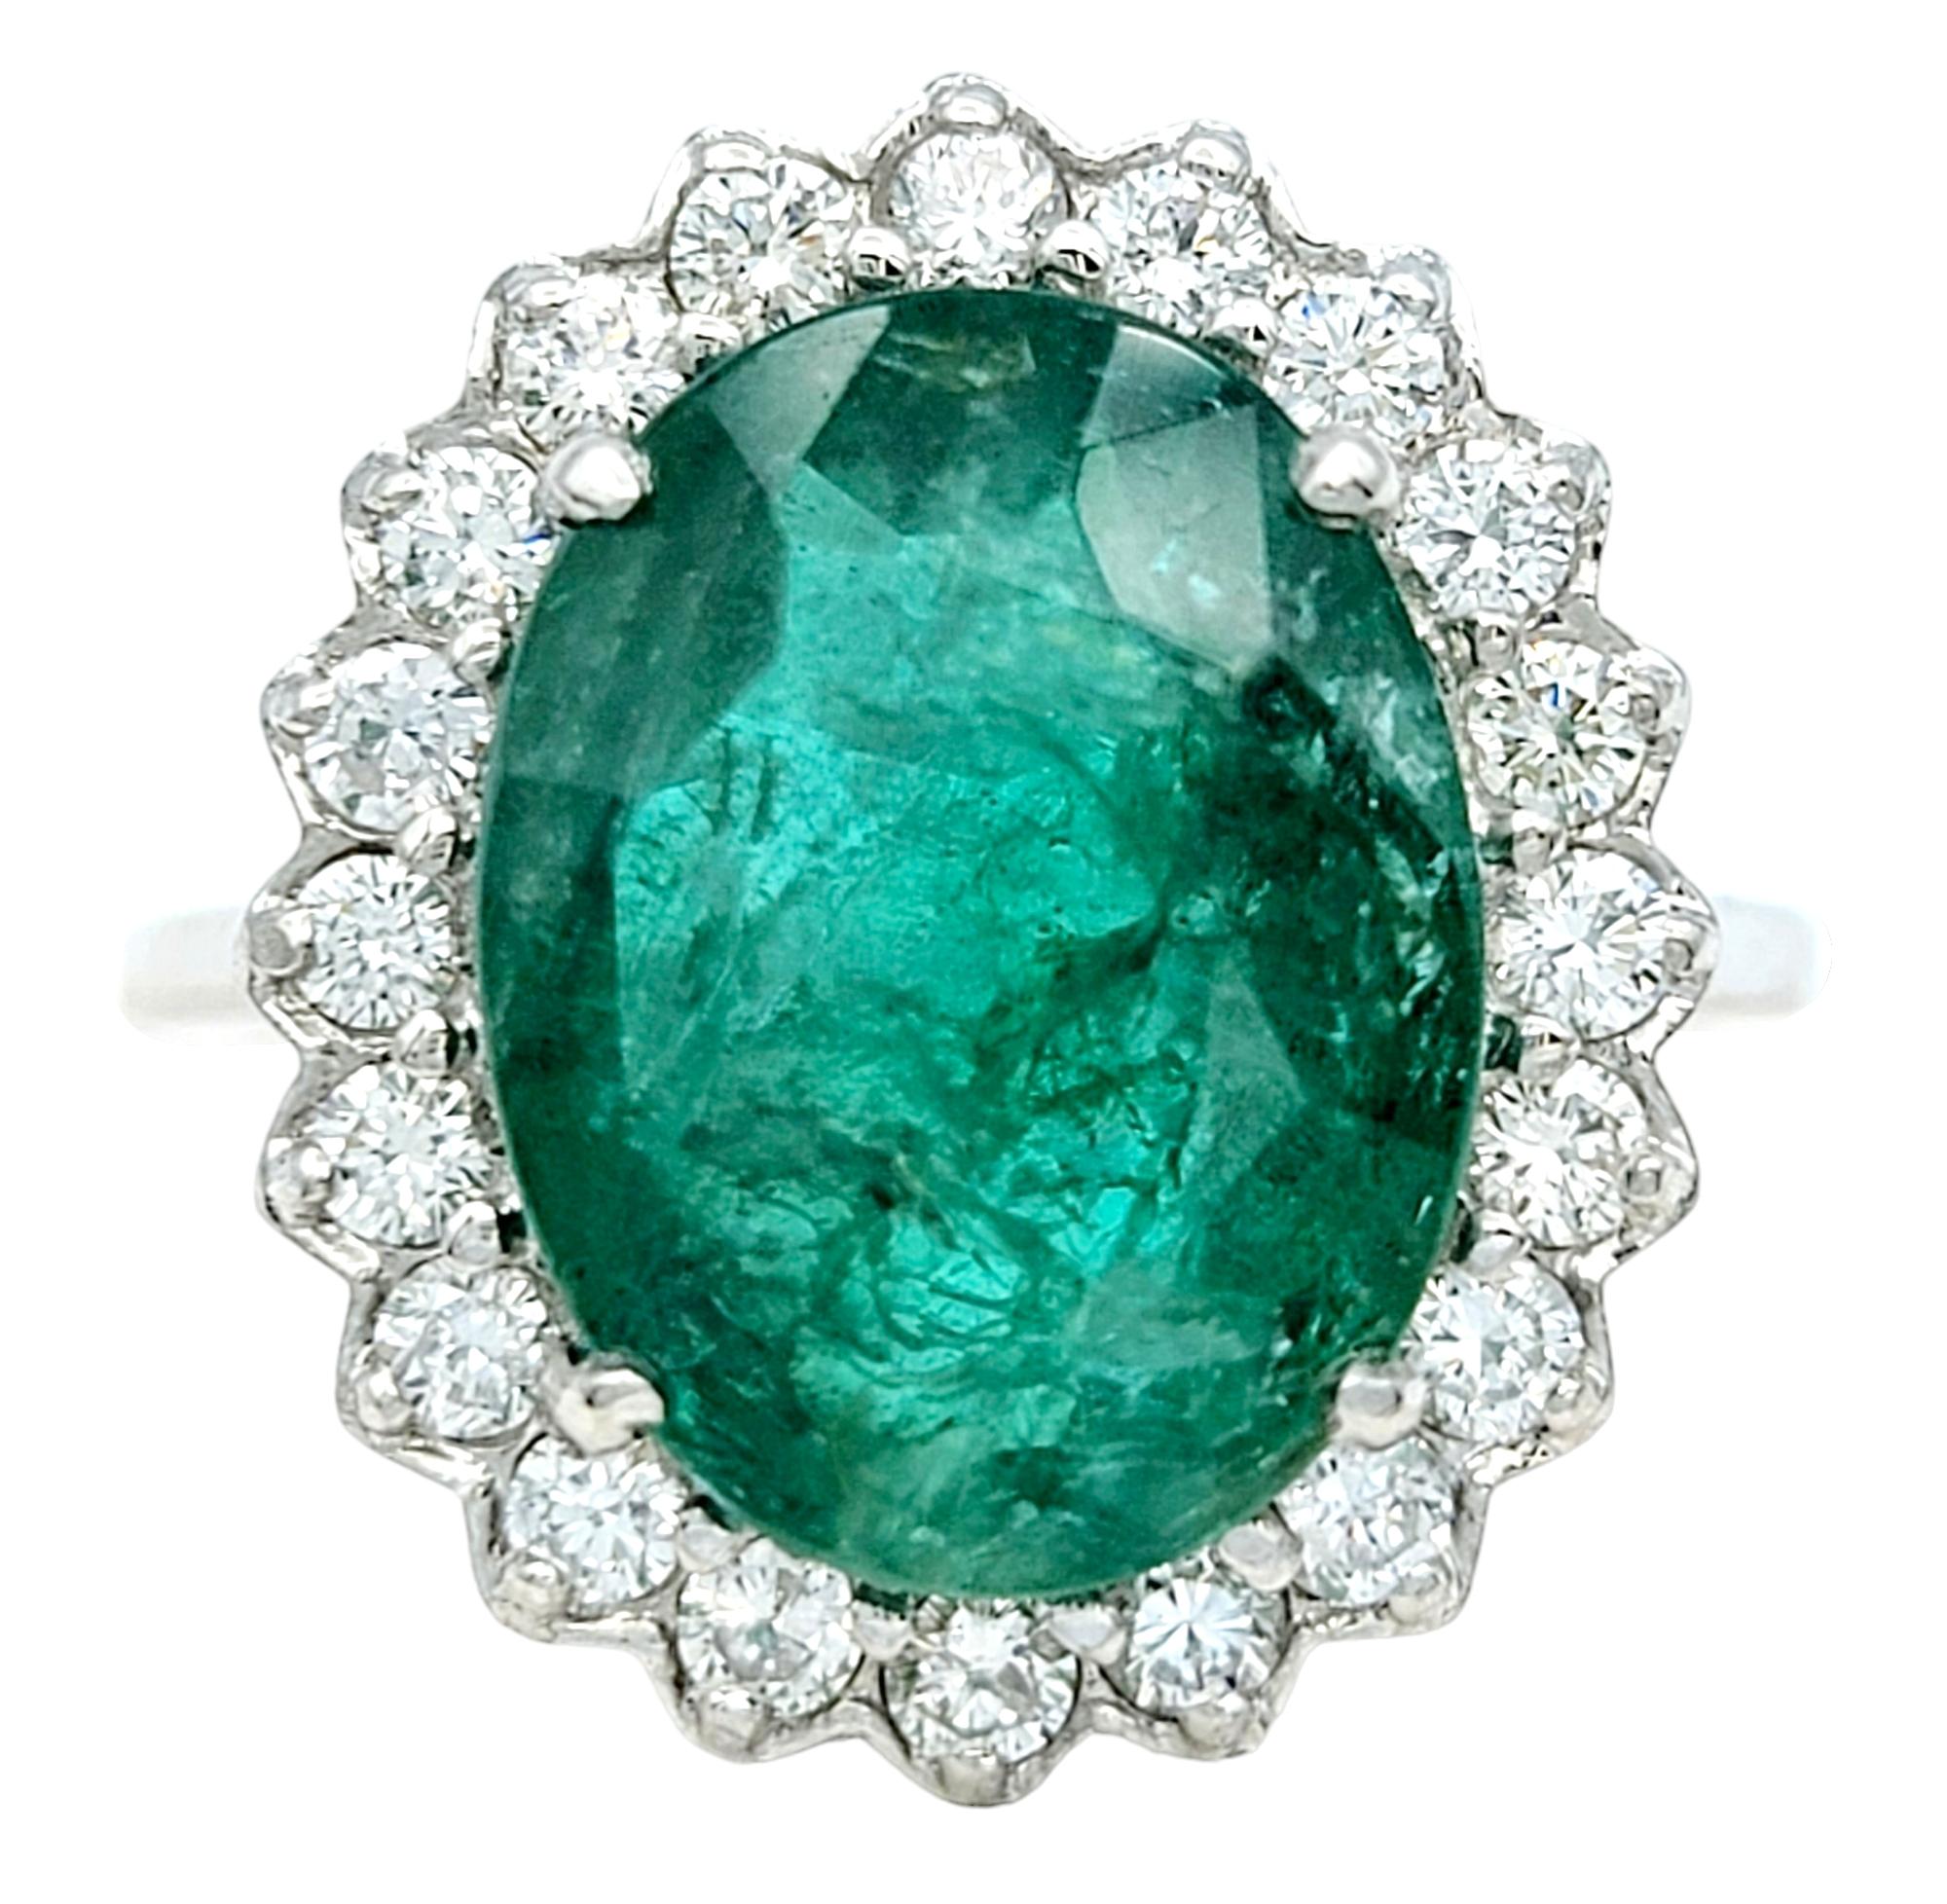 Ring size: 7.25

This exquisite ring is a dazzling testament to the beauty of natural gemstones. At its heart gleams a magnificent 4.98 carat oval-cut emerald, its bold green color exuding an aura of natural splendor. Encircling this lush gem is a